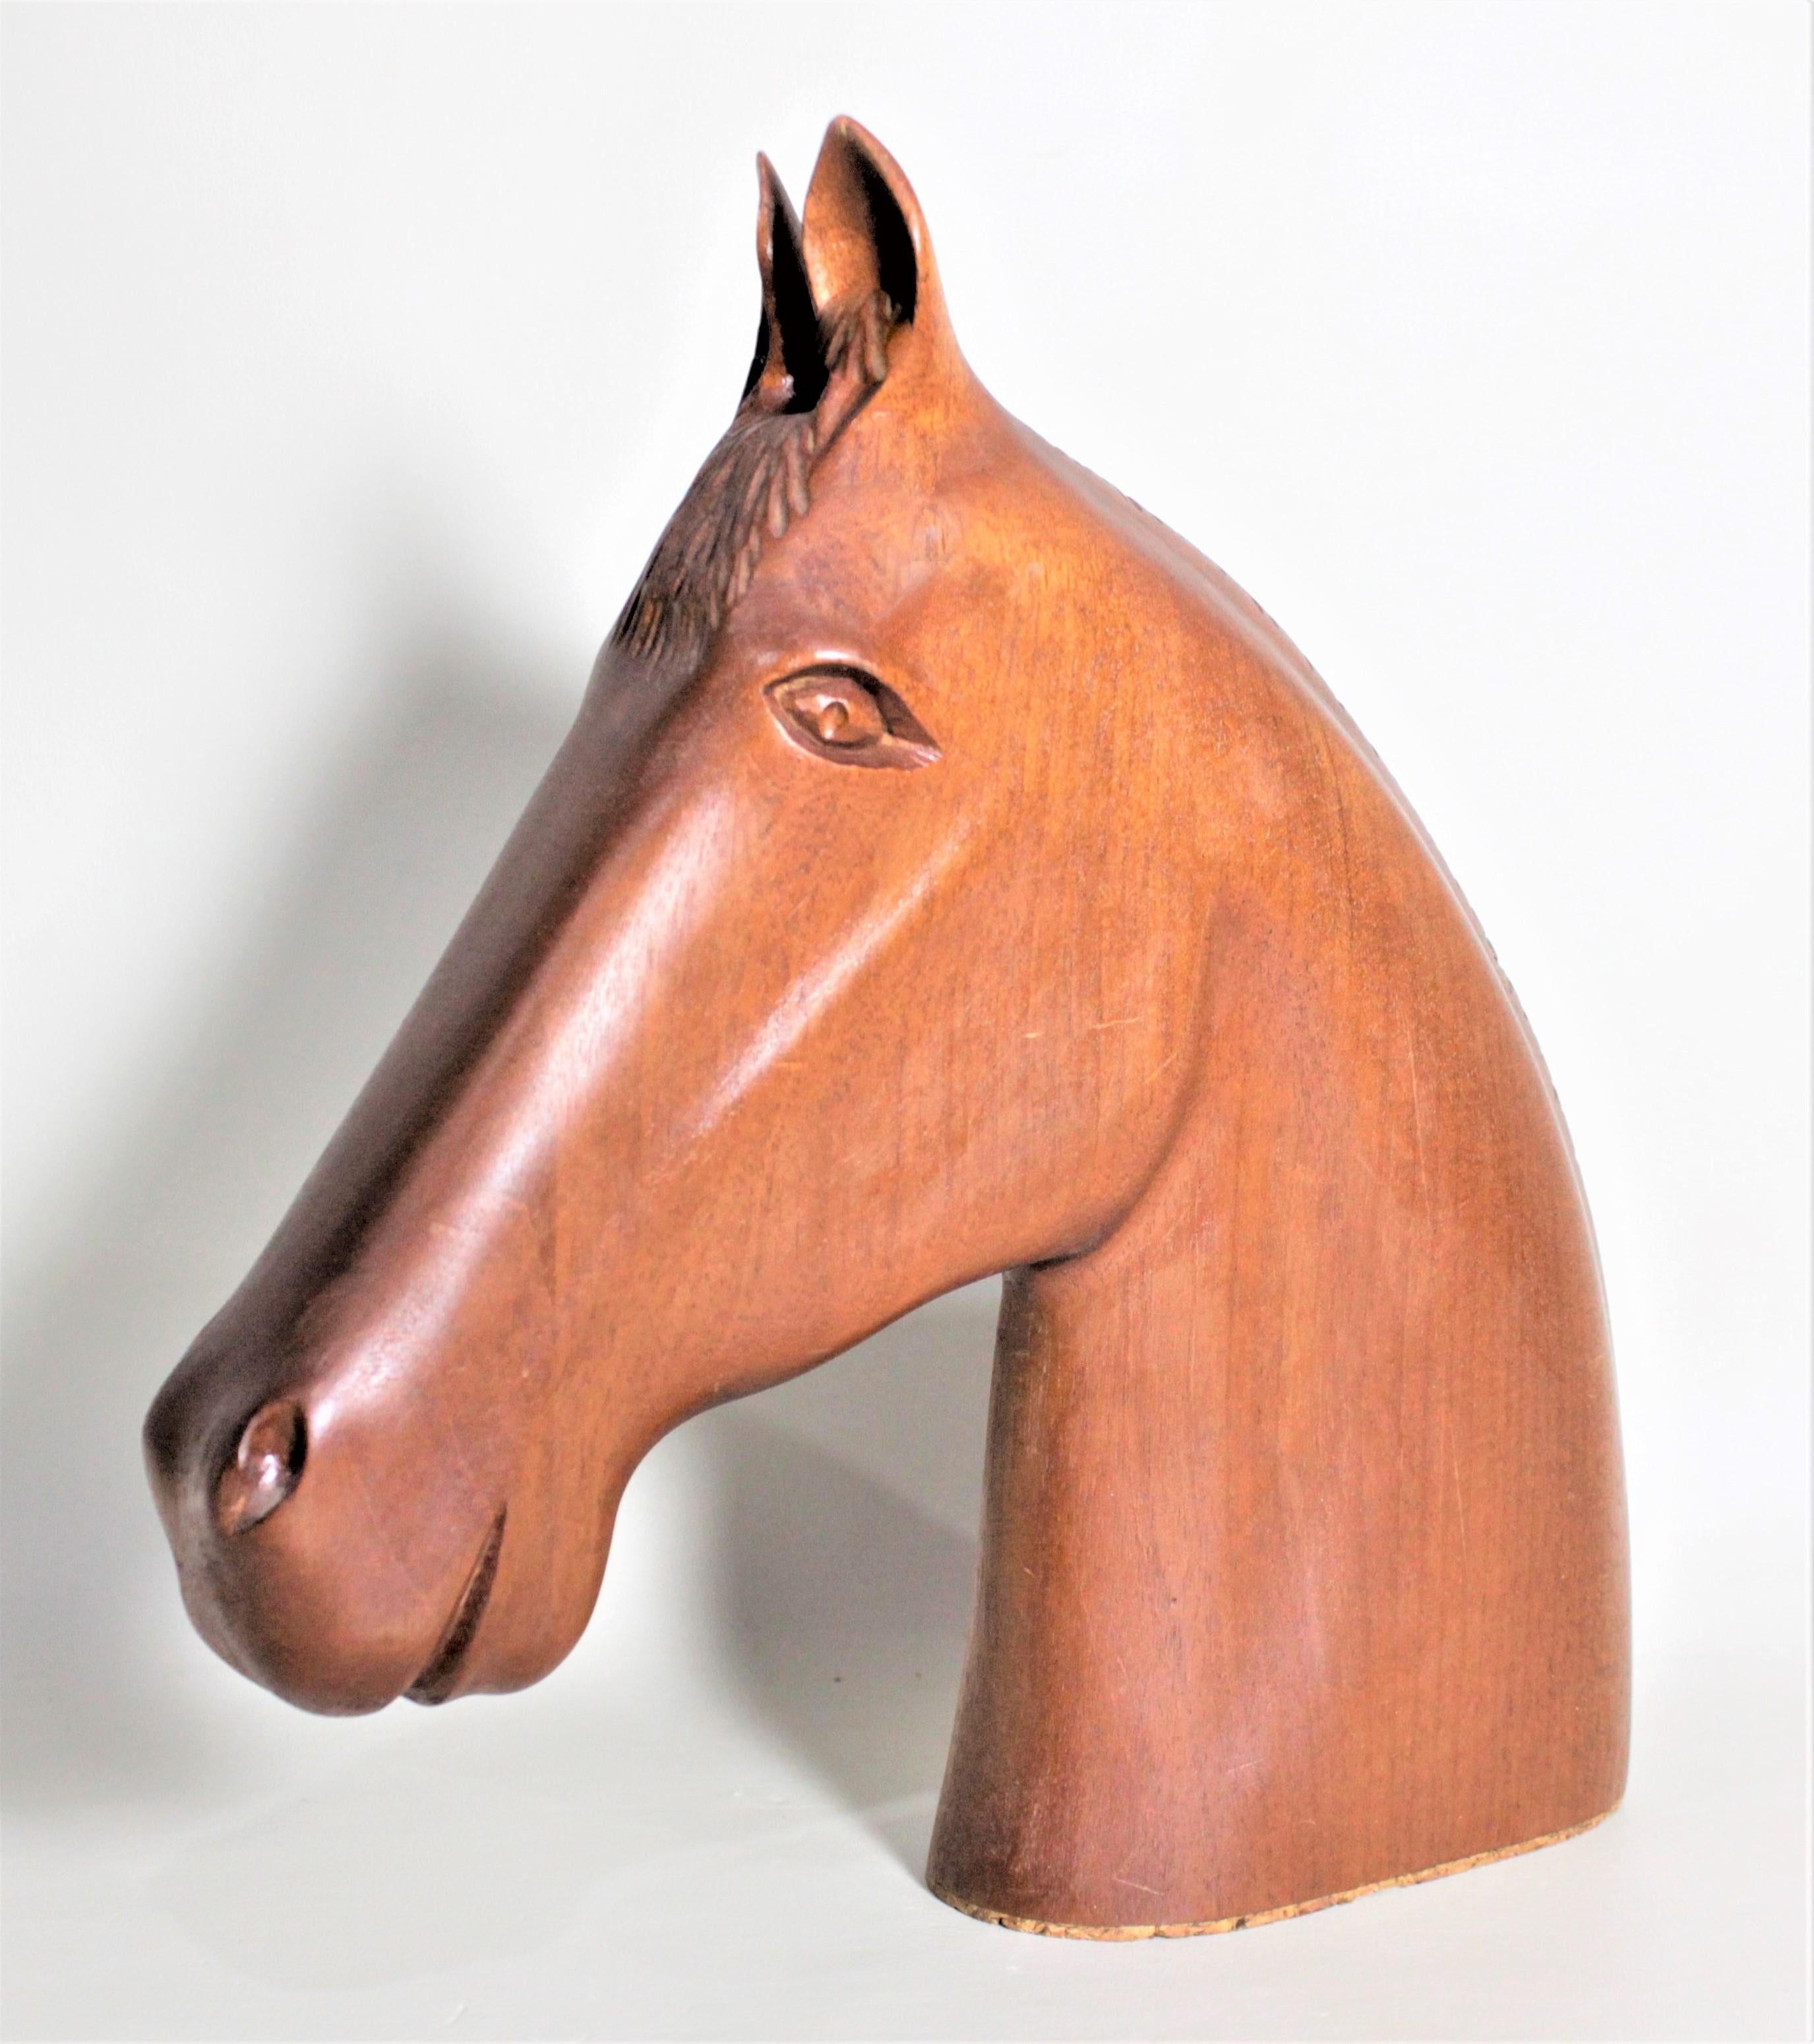 This solid teak stylized sculpture of a horse's head is unsigned but presumed to have been made in Scandinavia in circa 1970 in the midcentury style. The sculpture is carved out of a narrow solid block in a simplistic fashion giving it a streamlined